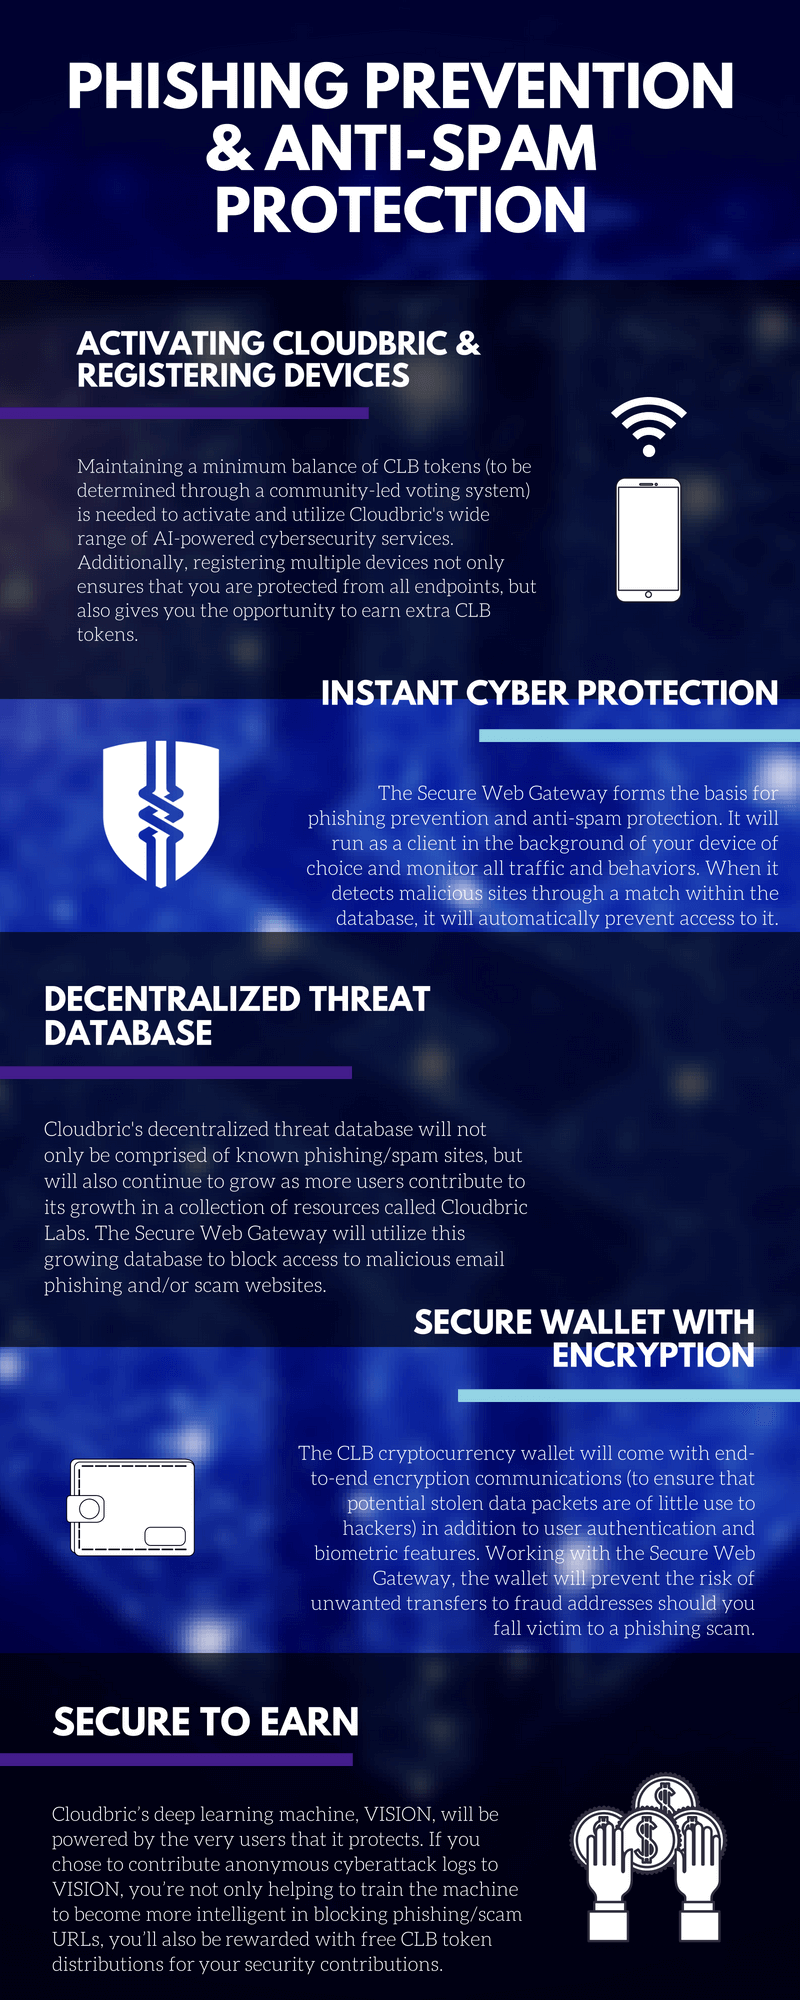 Phishing prevention, anti-spam protection infographic